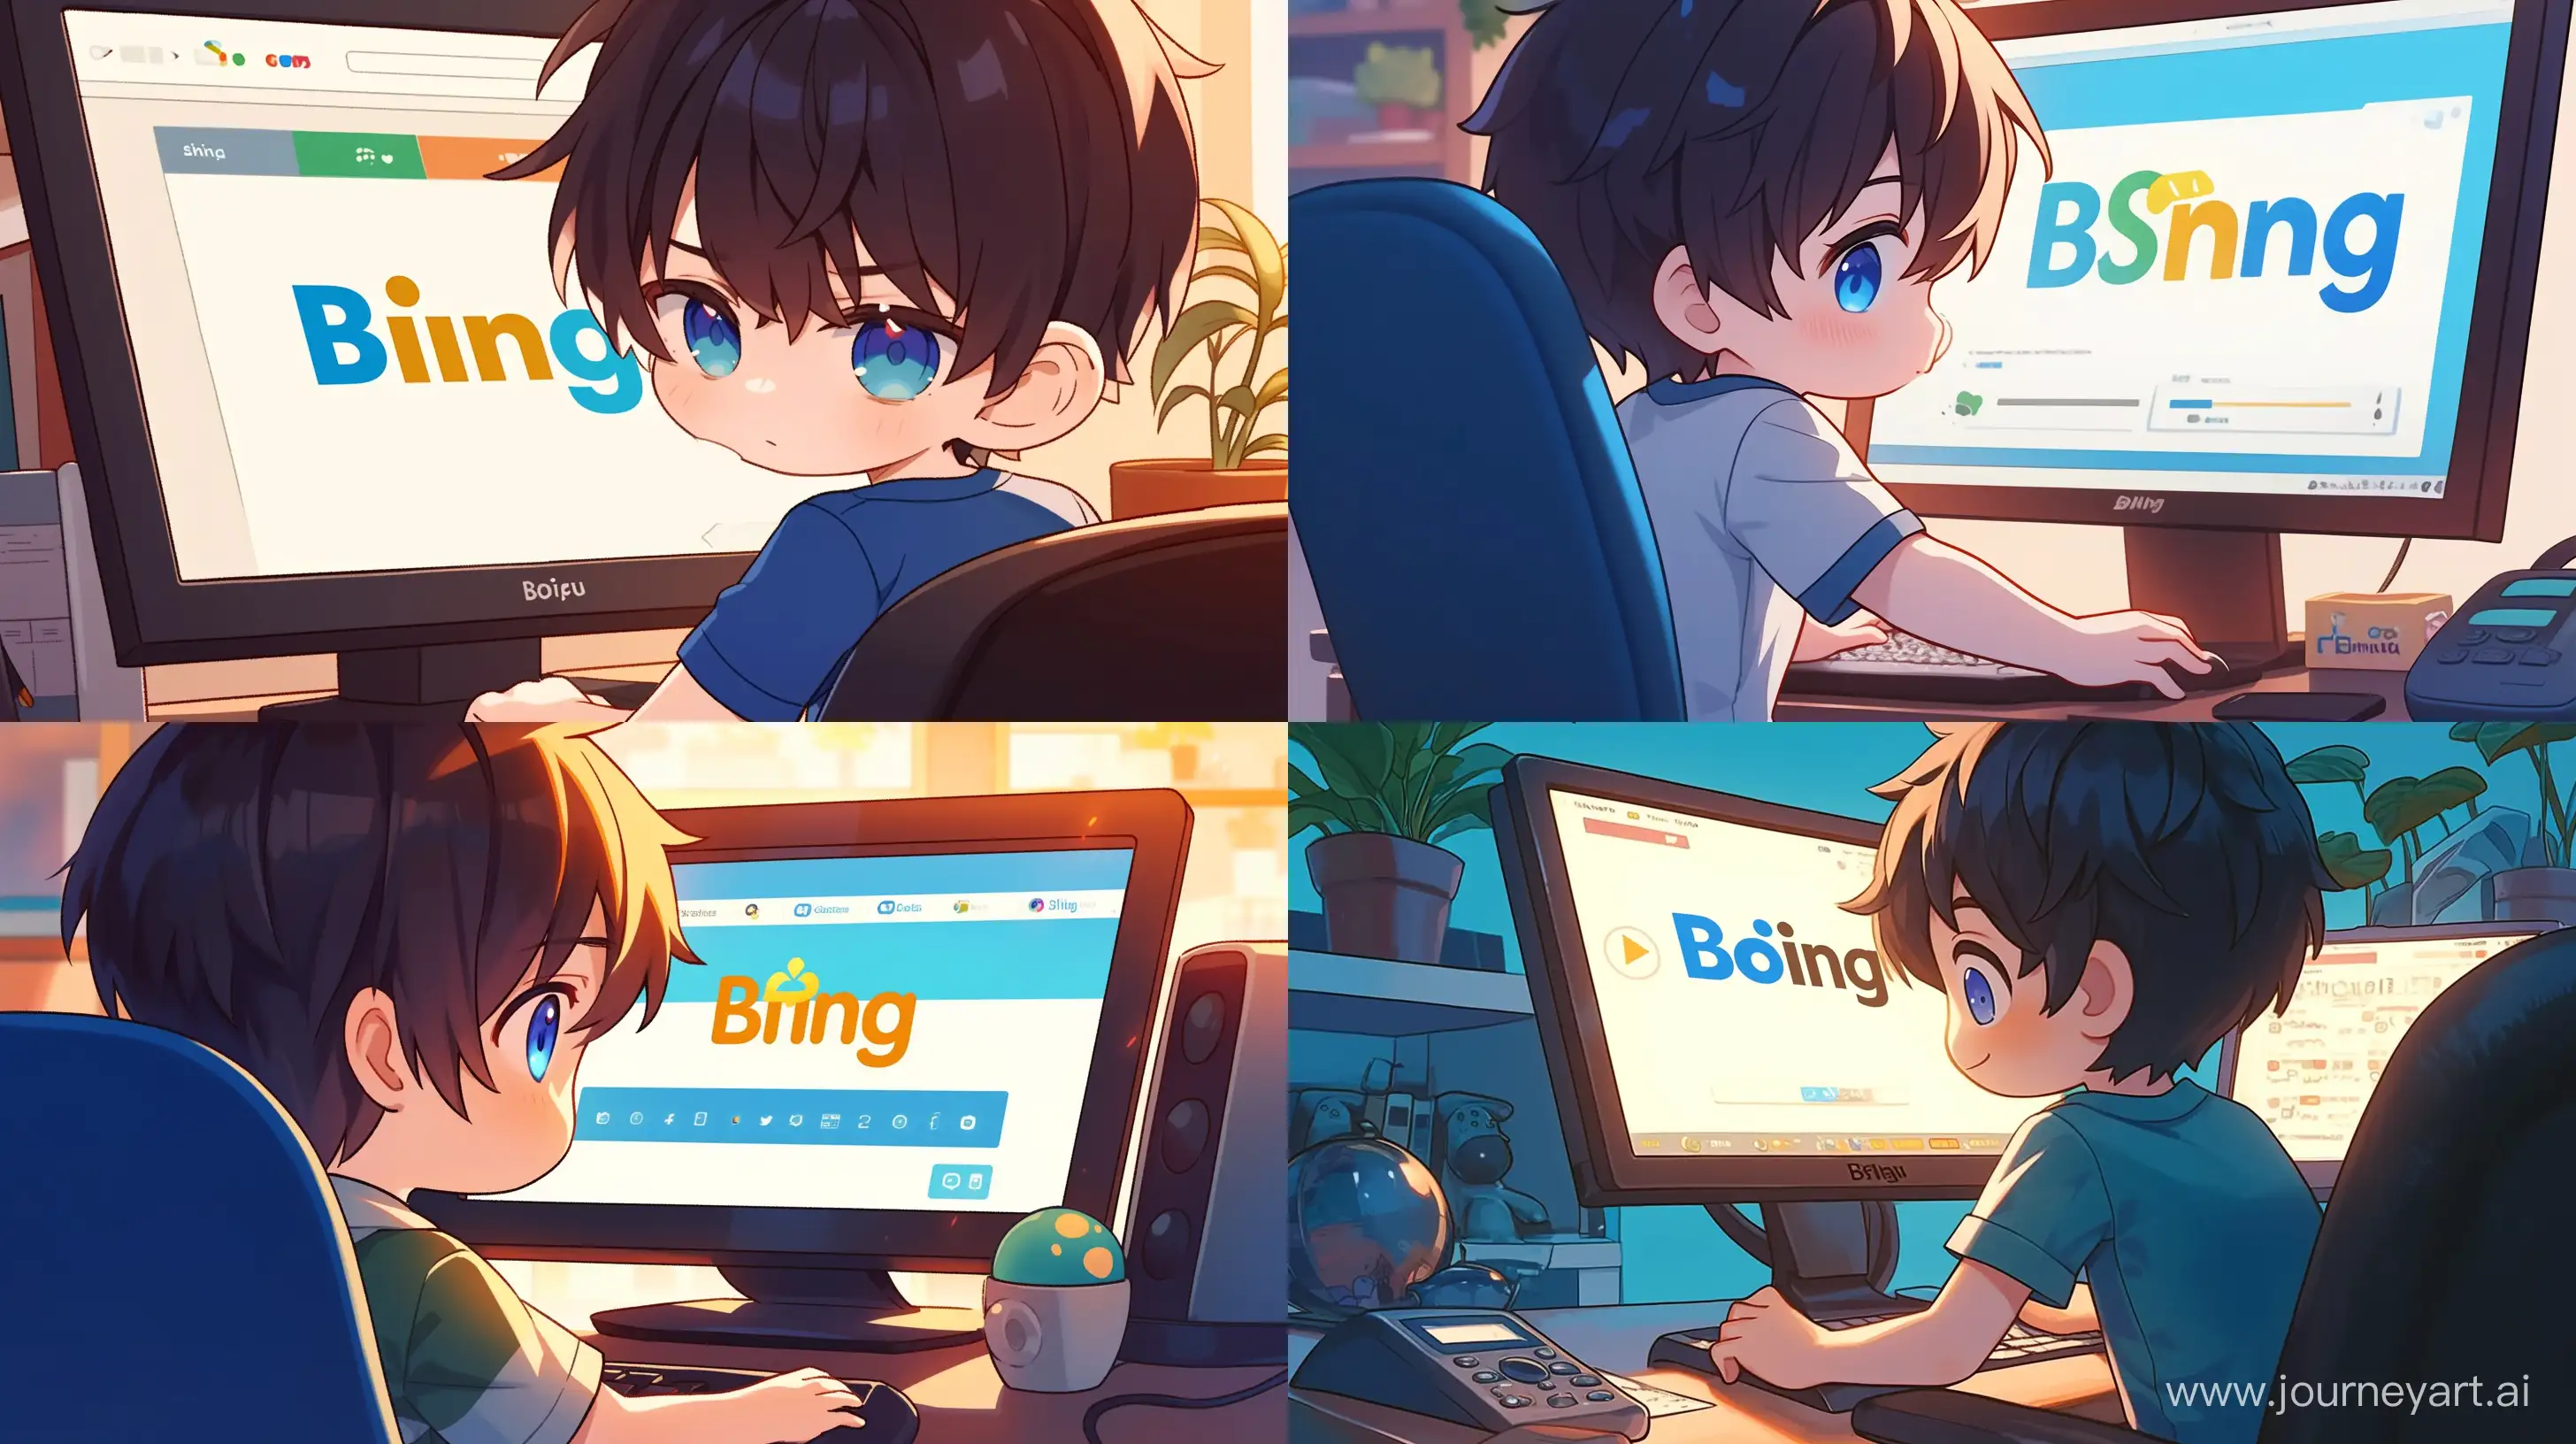 Chibi-Style-Anime-Boy-Searching-with-Bing-on-Monitor